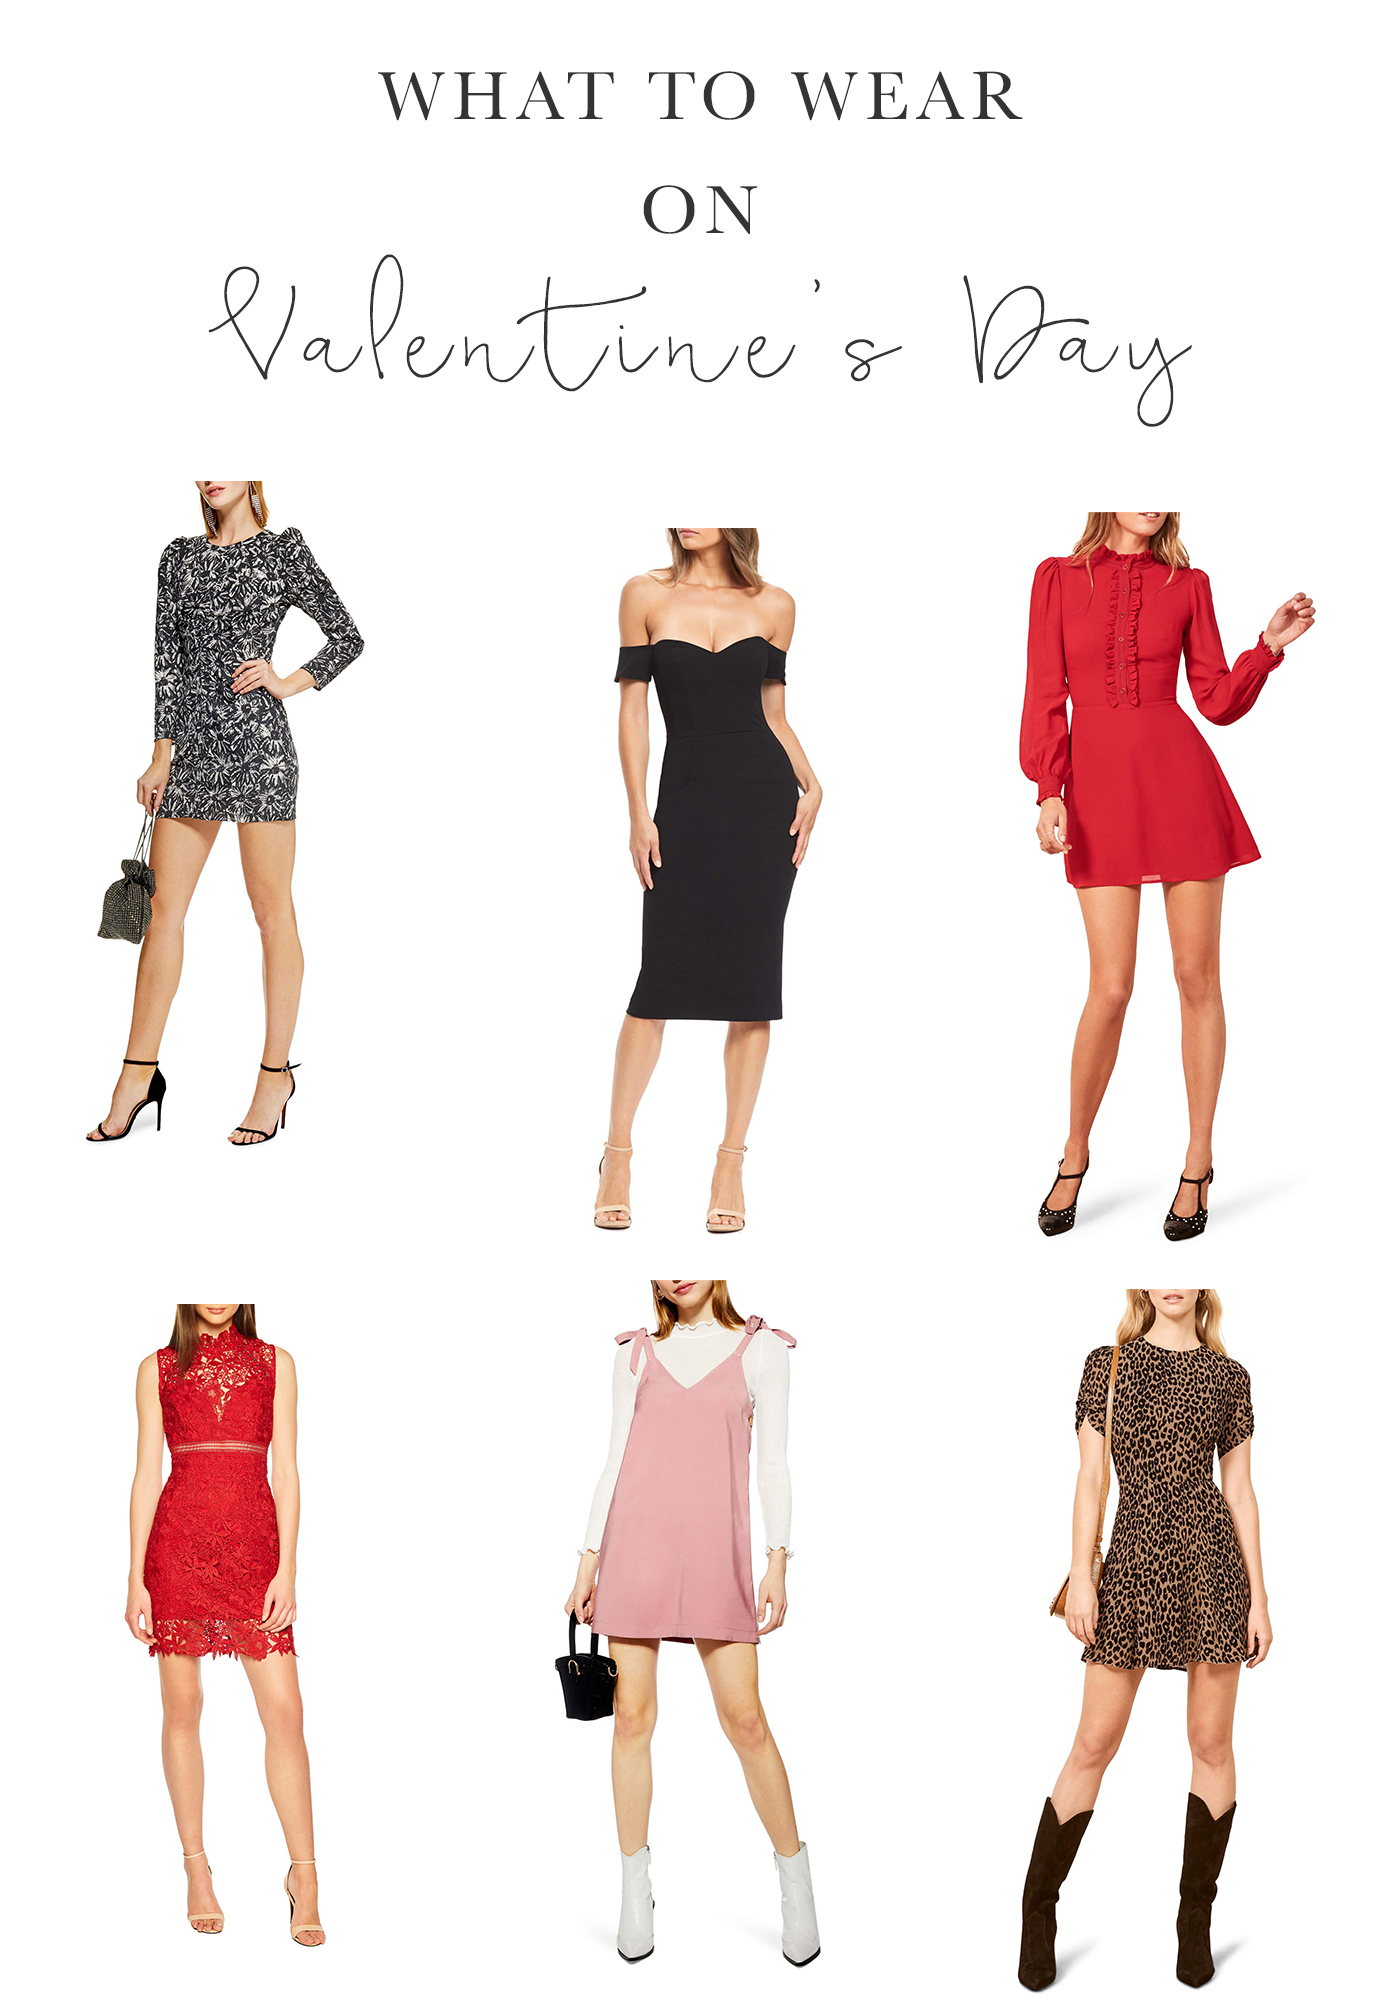 What To Wear for Valentine's Day | Date Night Outfit | Valentine's Day Dresses | Blondie in the City by Hayley Larue